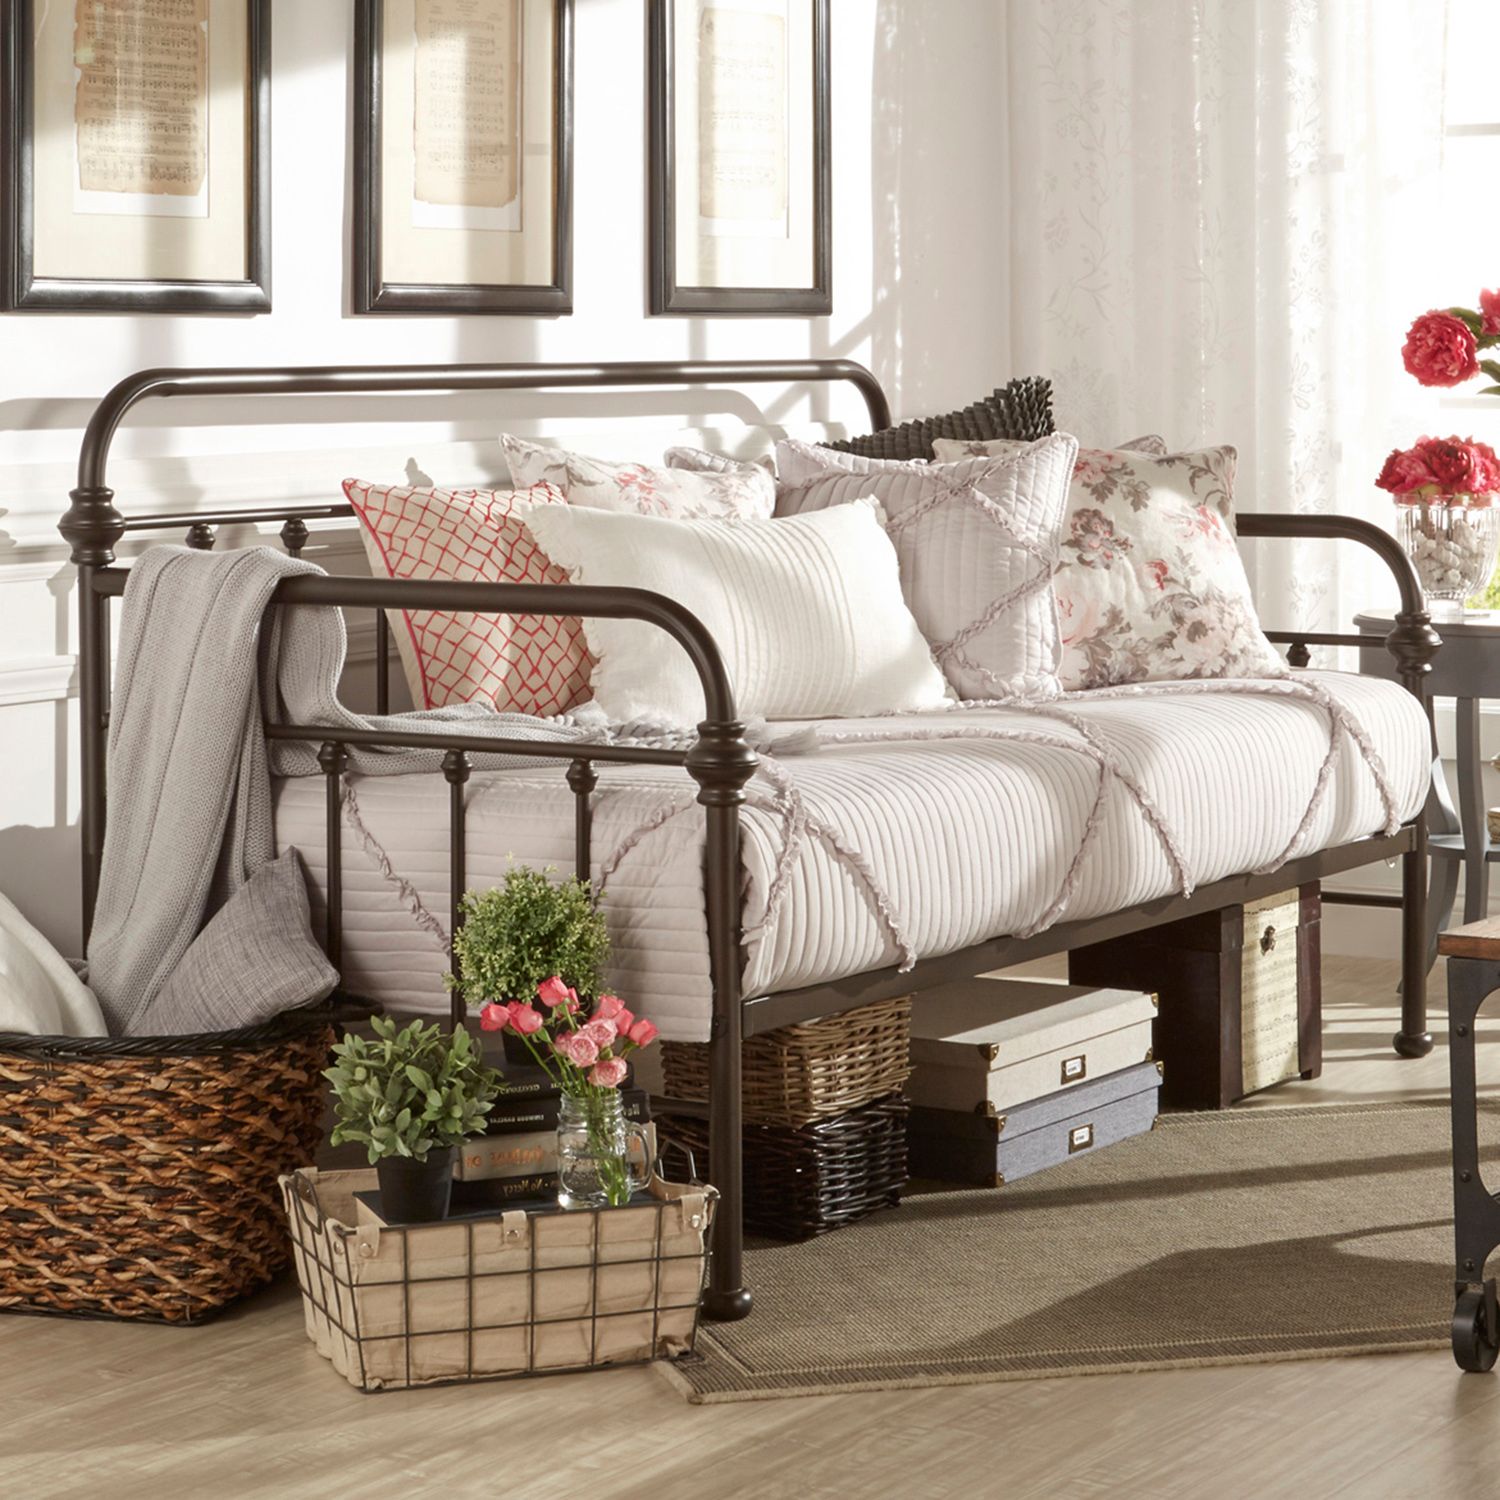 Image for HomeVance Alaina Day Bed at Kohl's.